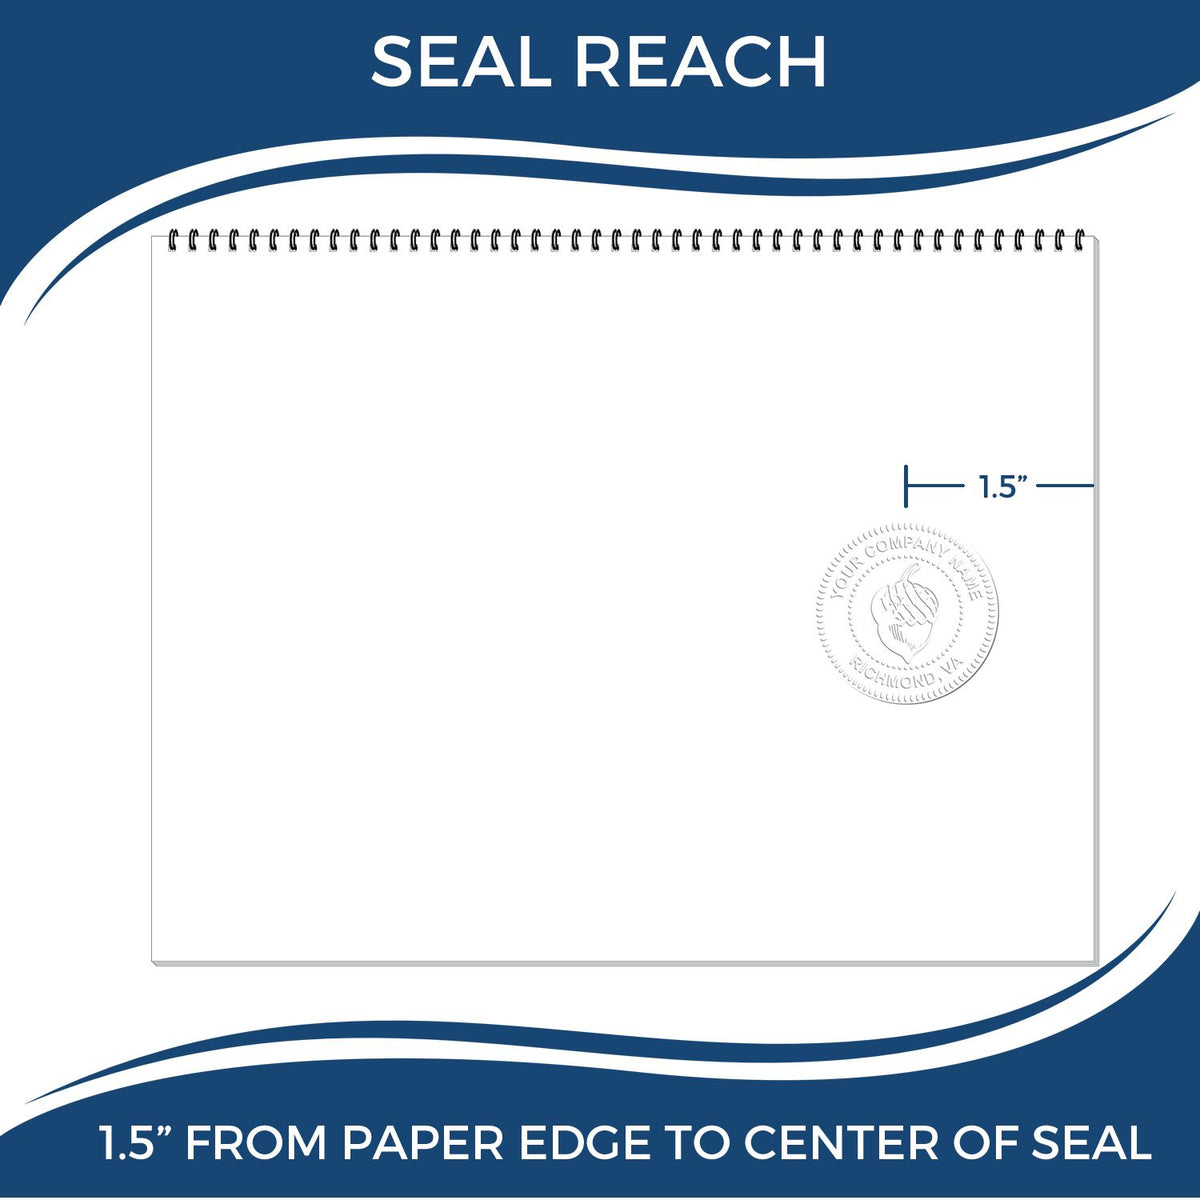 An infographic showing the seal reach which is represented by a ruler and a miniature seal image of the Gift Nebraska Landscape Architect Seal